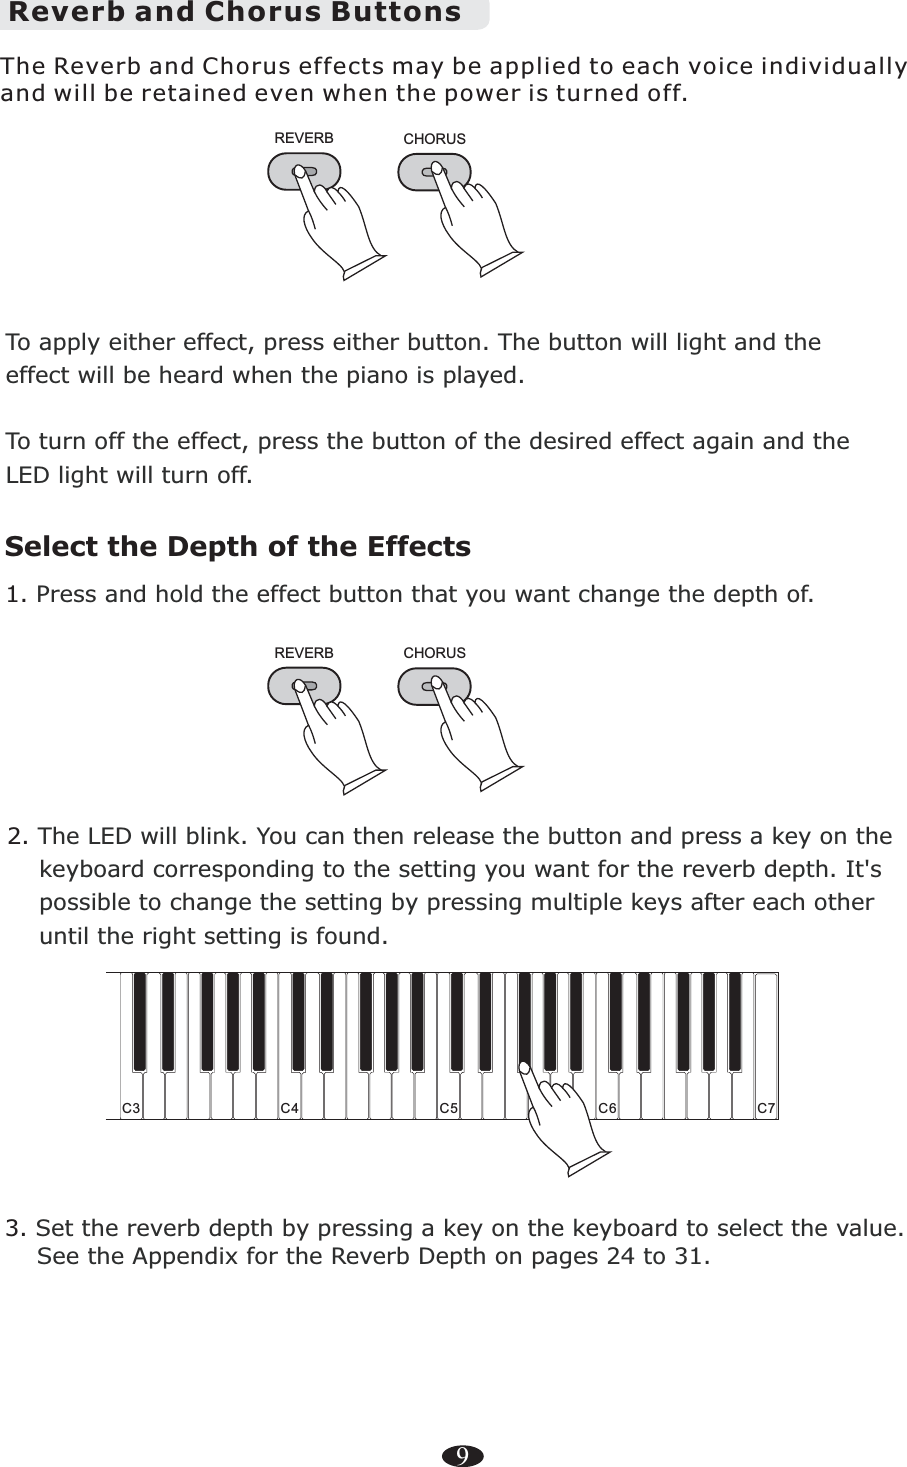 9Reverb and Chorus ButtonsTo apply either effect, press either button. The button will light and theeffect will be heard when the piano is played.To turn off the effect, press the button of the desired effect again and theLED light will turn off.REVERB3. Set the reverb depth by pressing a key on the keyboard to select the value.     See the Appendix for the Reverb Depth on pages 24 to 31.C4 C5 C6 C7C3The Reverb and Chorus effects may be applied to each voice individually and will be retained even when the power is turned off.CHORUSSelect the Depth of the Effects1. Press and hold the effect button that you want change the depth of.REVERB CHORUS2. The LED will blink. You can then release the button and press a key on the     keyboard corresponding to the setting you want for the reverb depth. It&apos;s     possible to change the setting by pressing multiple keys after each other     until the right setting is found.